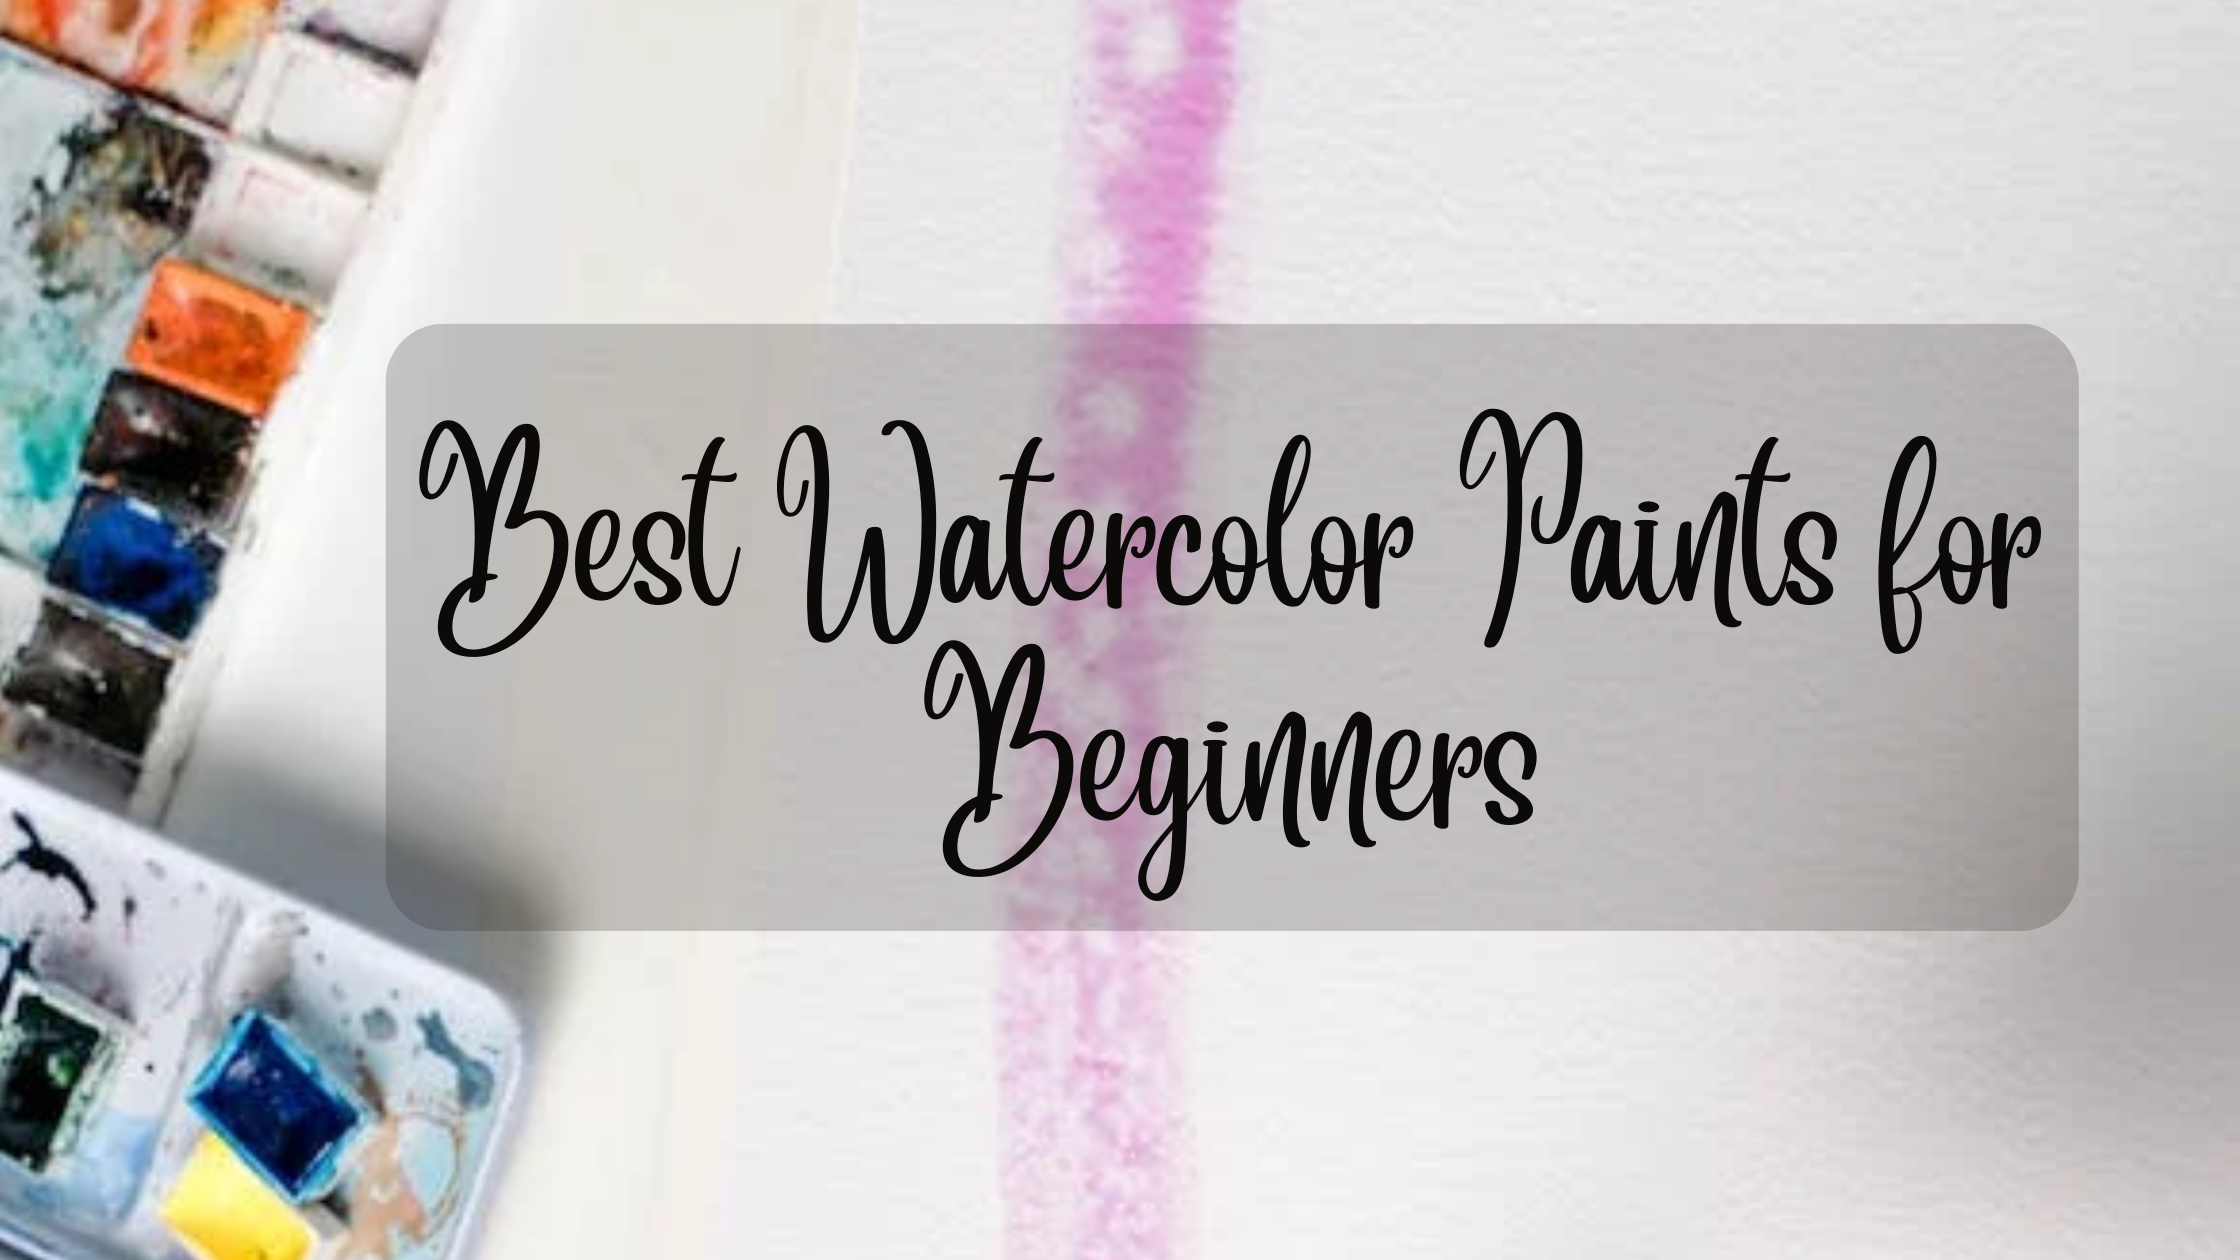 Best Watercolor Paints for Beginners